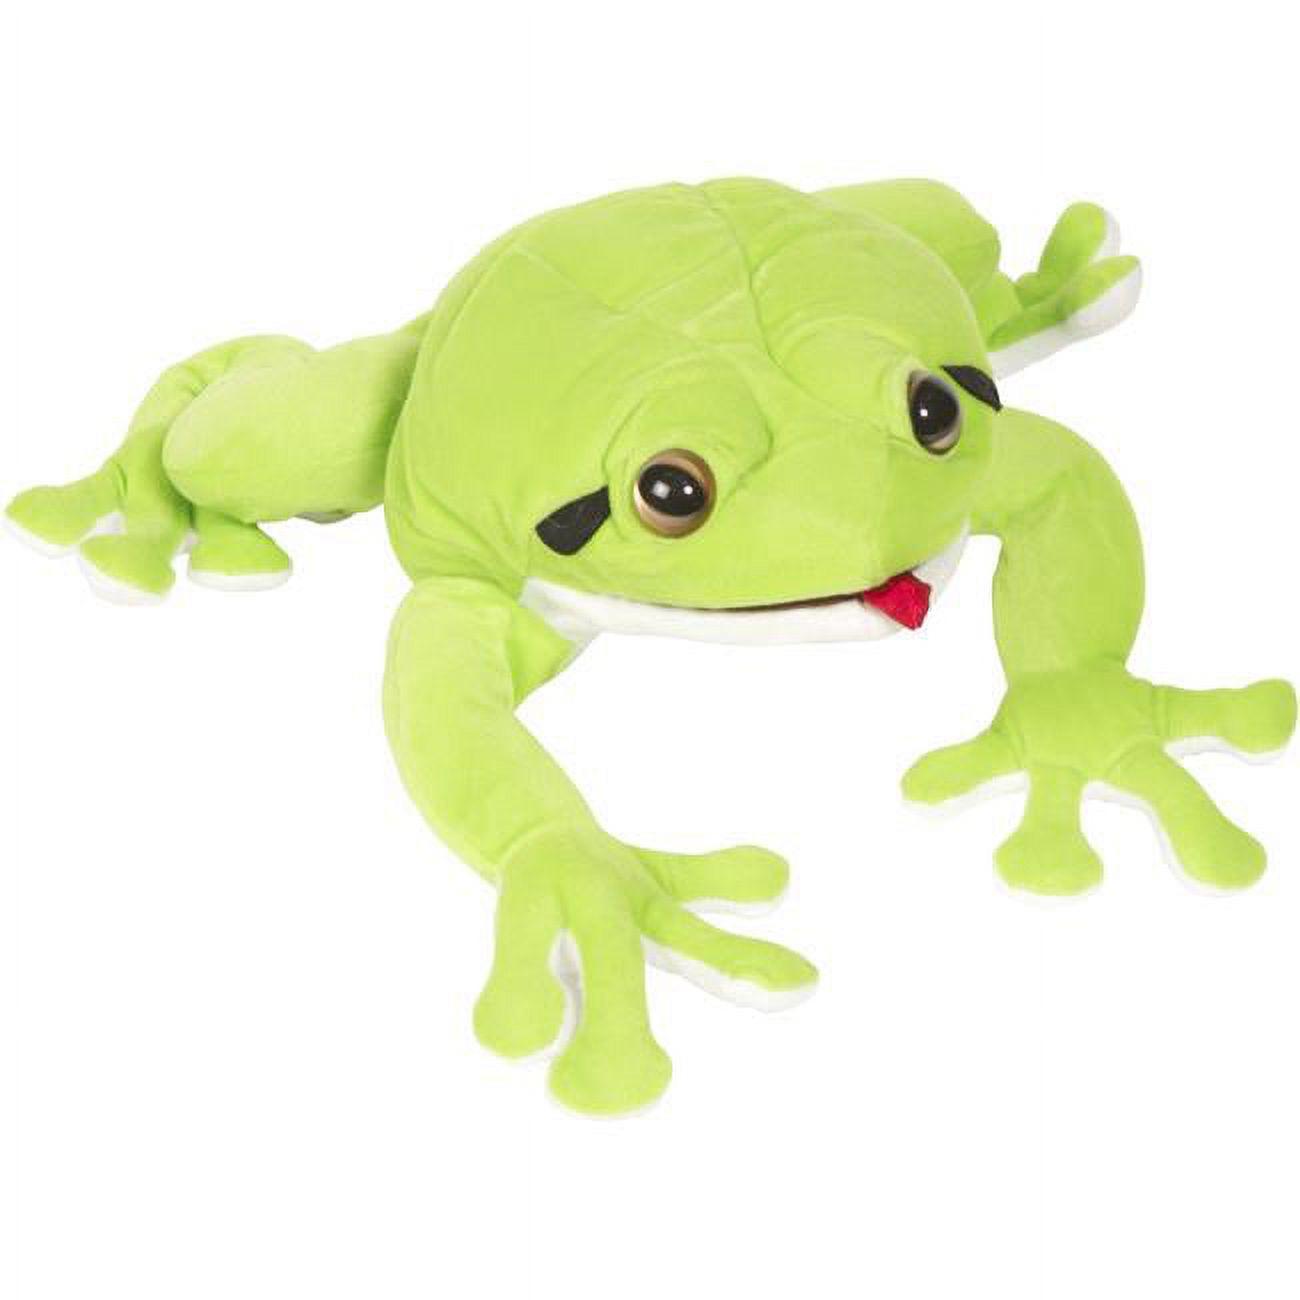 Sunny NP8214 12 In. Frog - Whites Tree Puppet - image 1 of 1